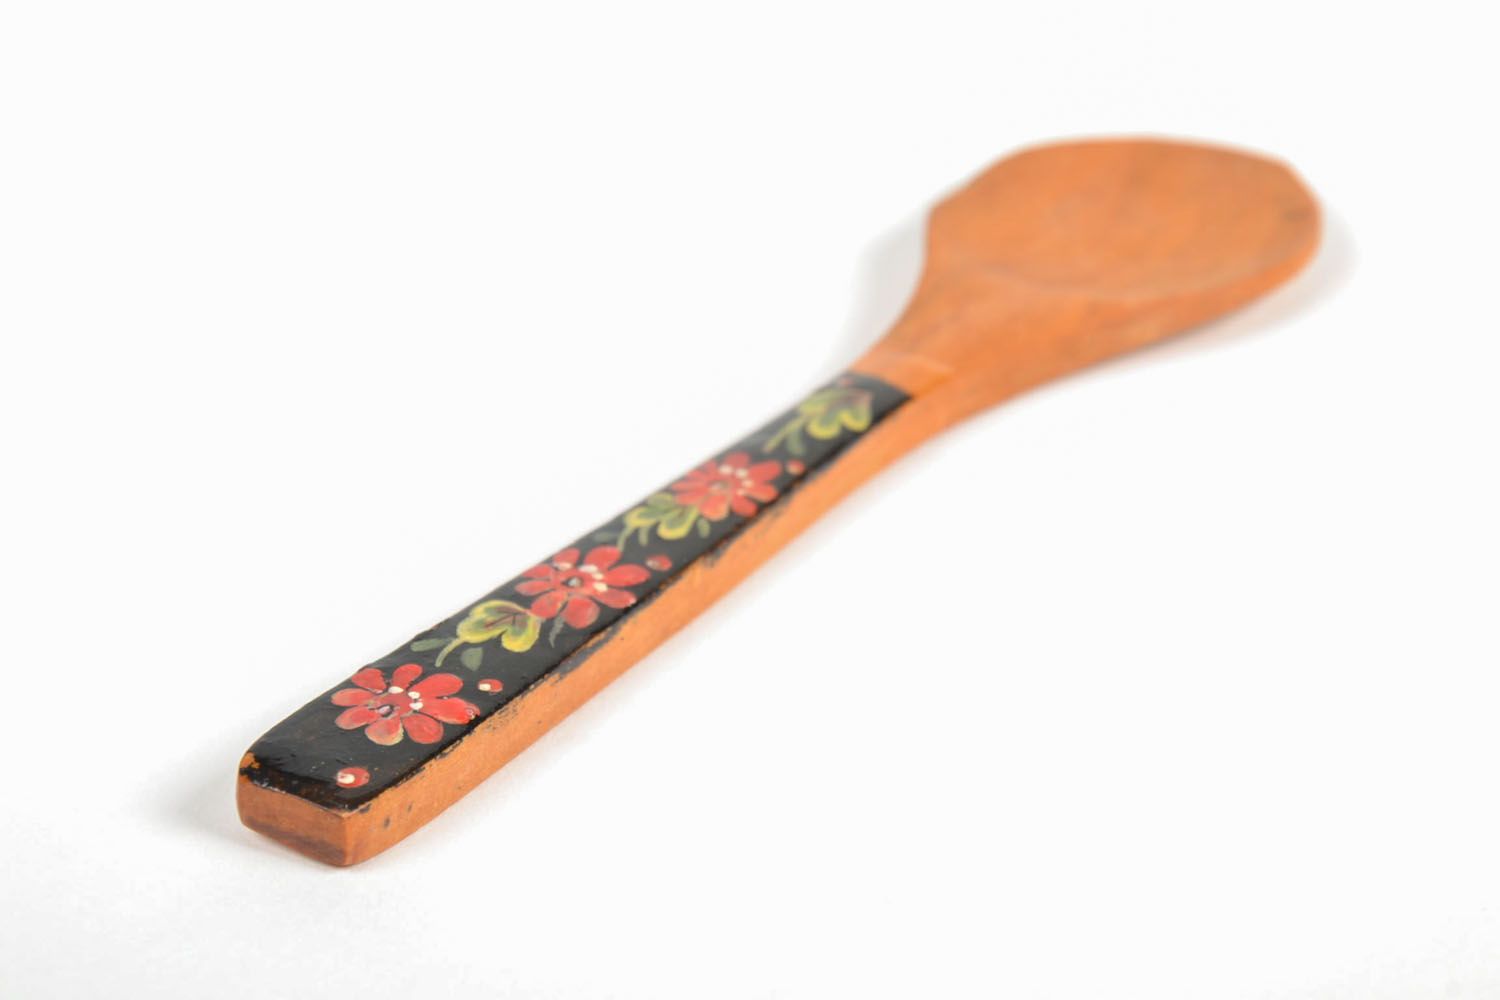 Painted wooden spoon photo 3